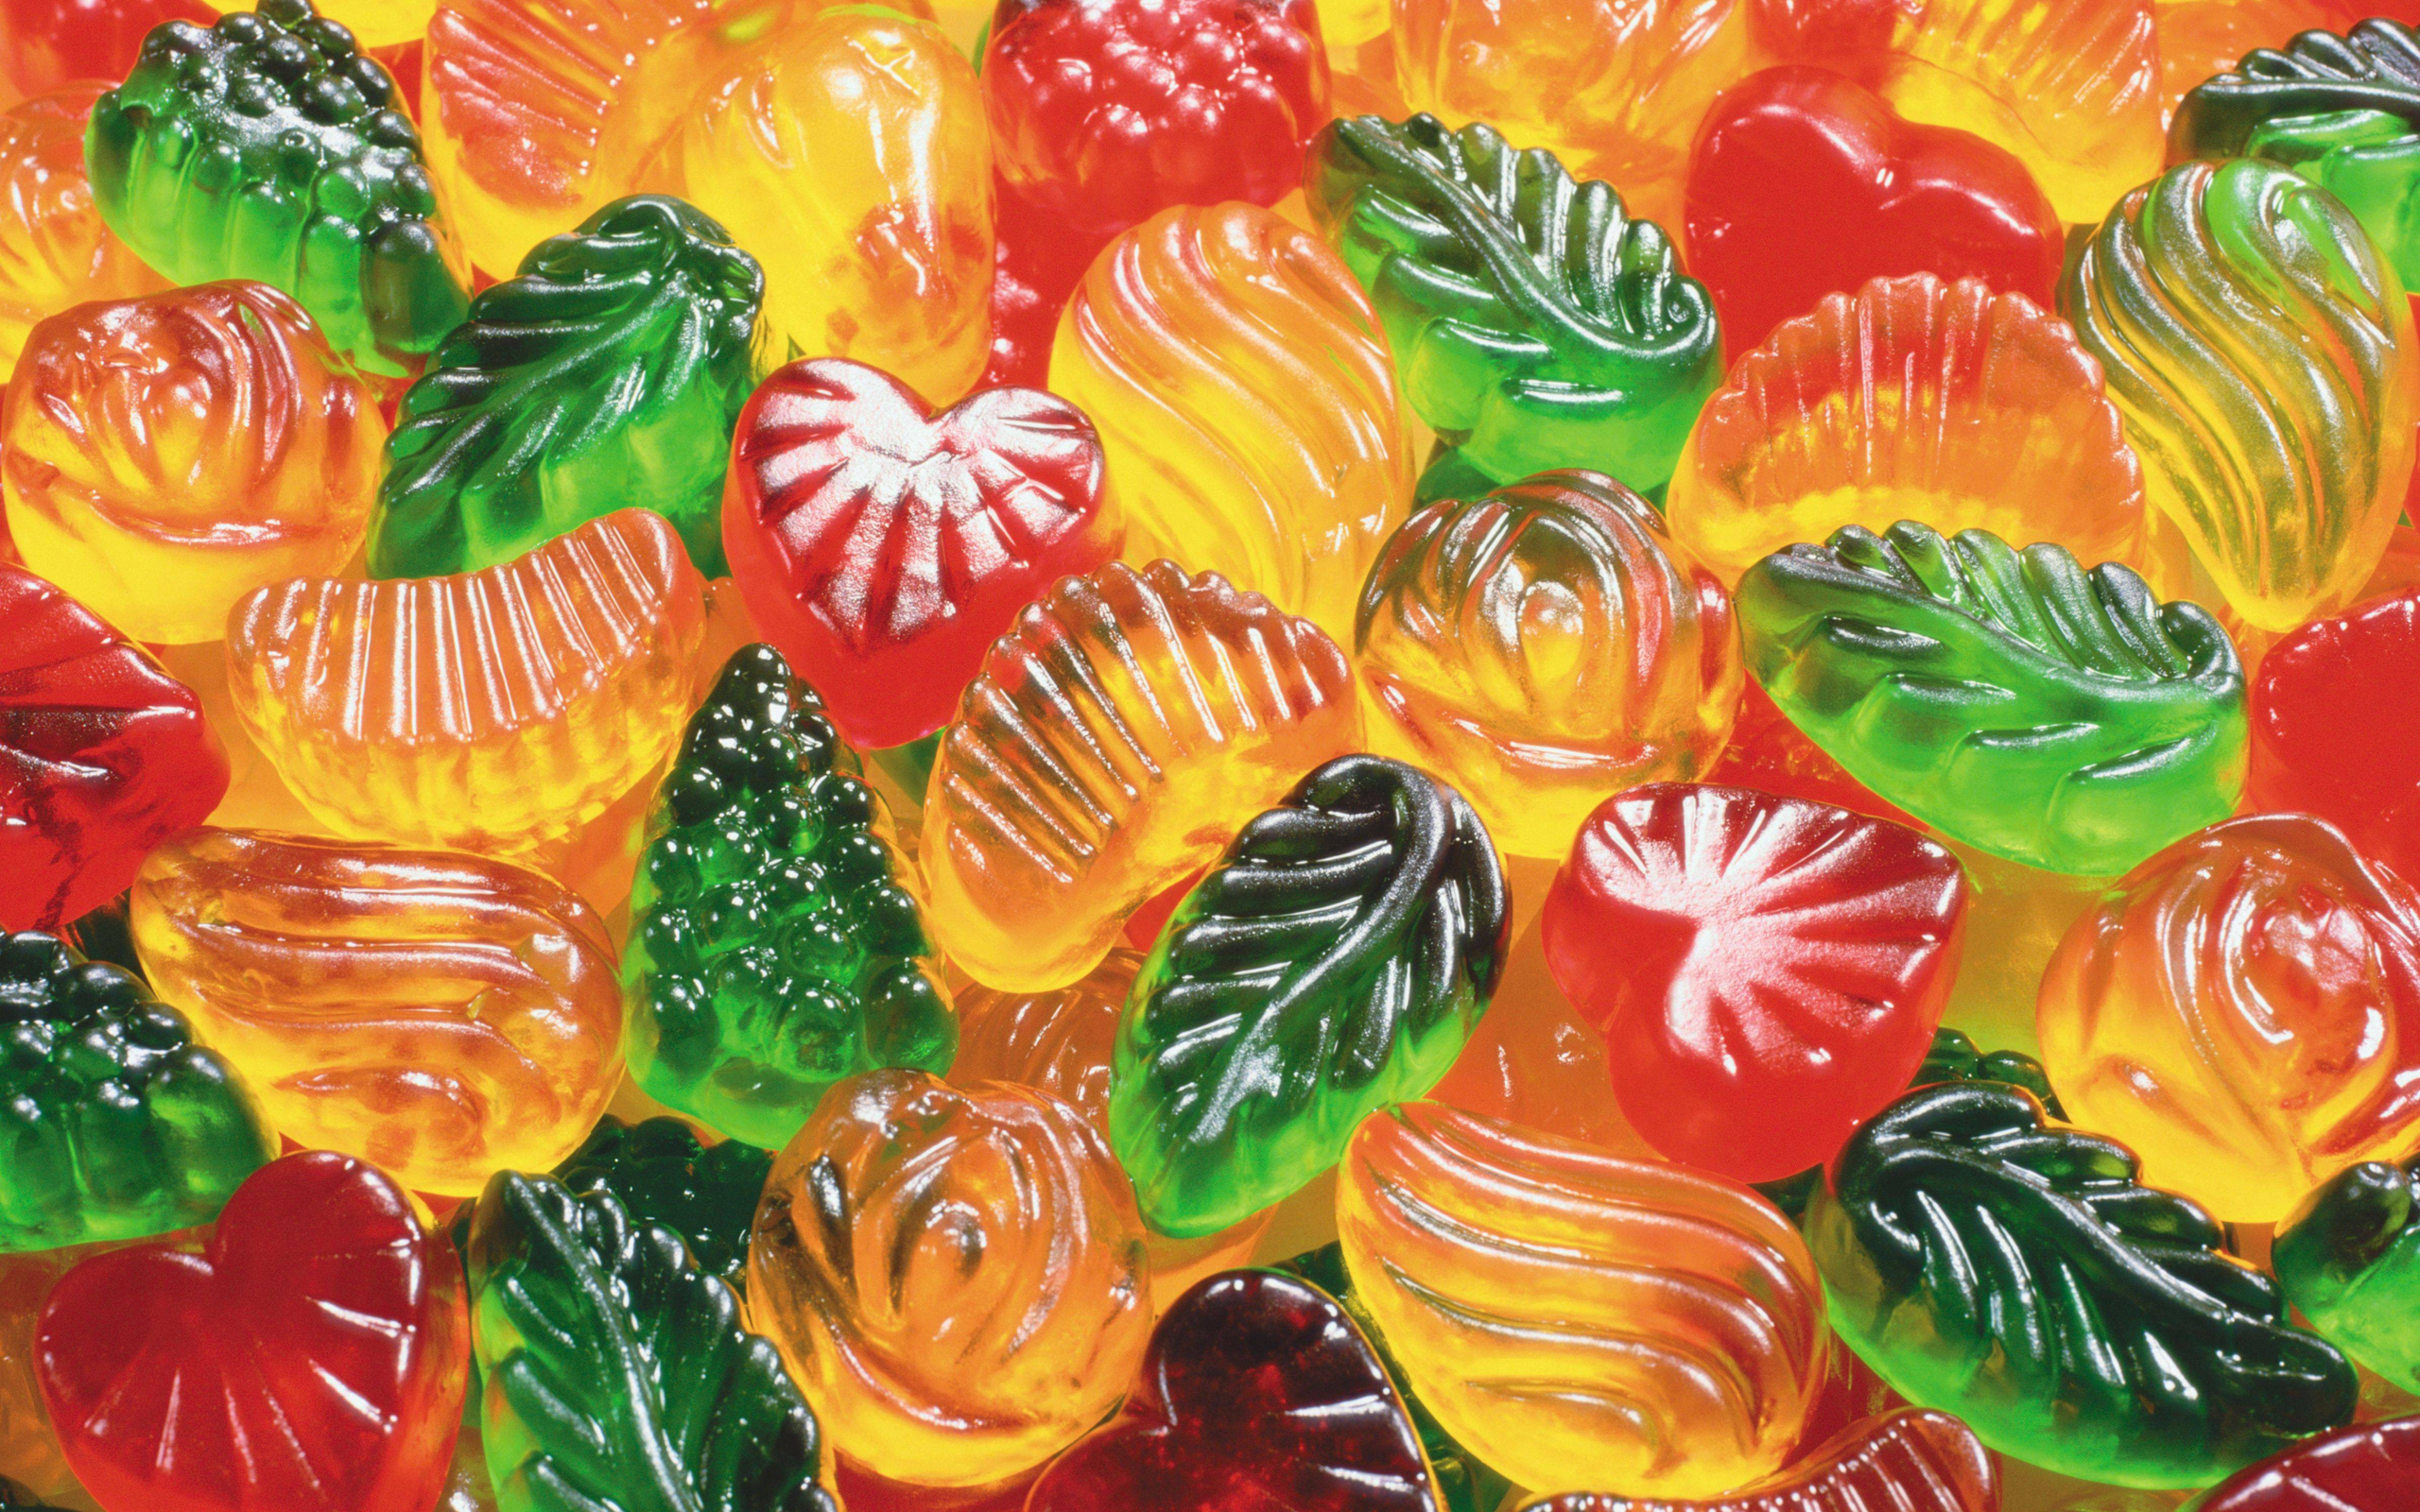 Candy Computer Wallpapers, Desktop Backgrounds | 2560x1600 | ID:368749